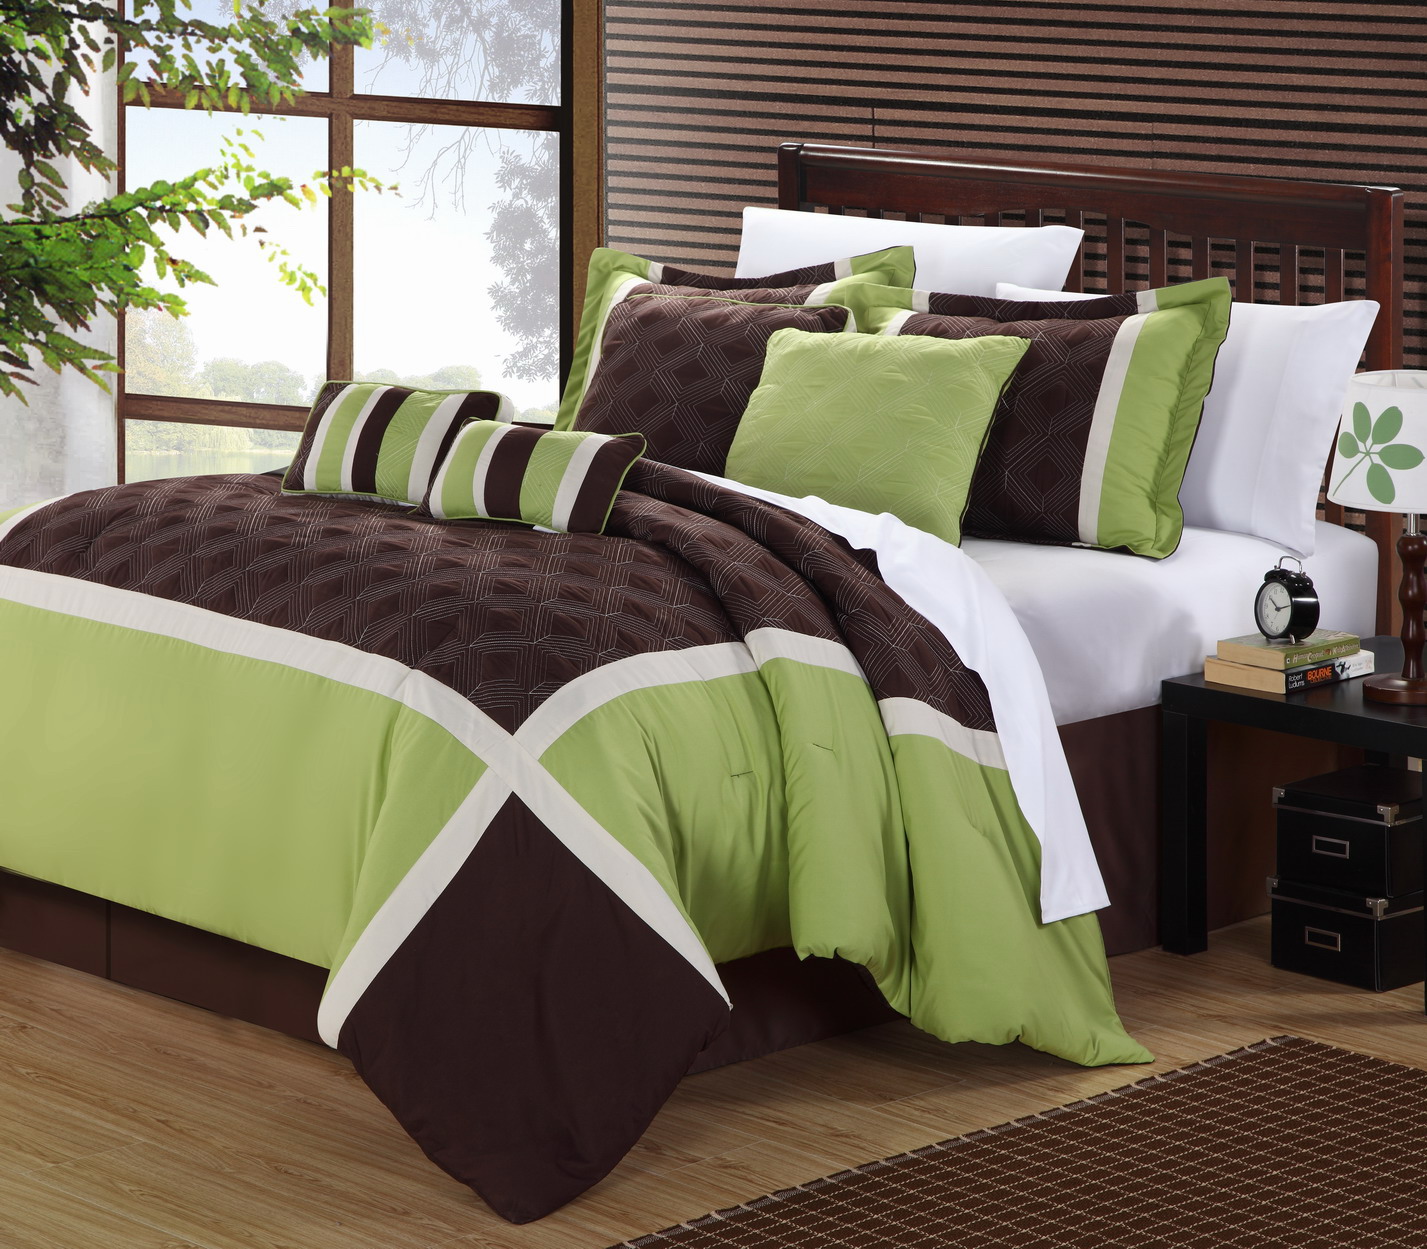 Chic Home Quincy 8 pc Embroidered Comforter Set